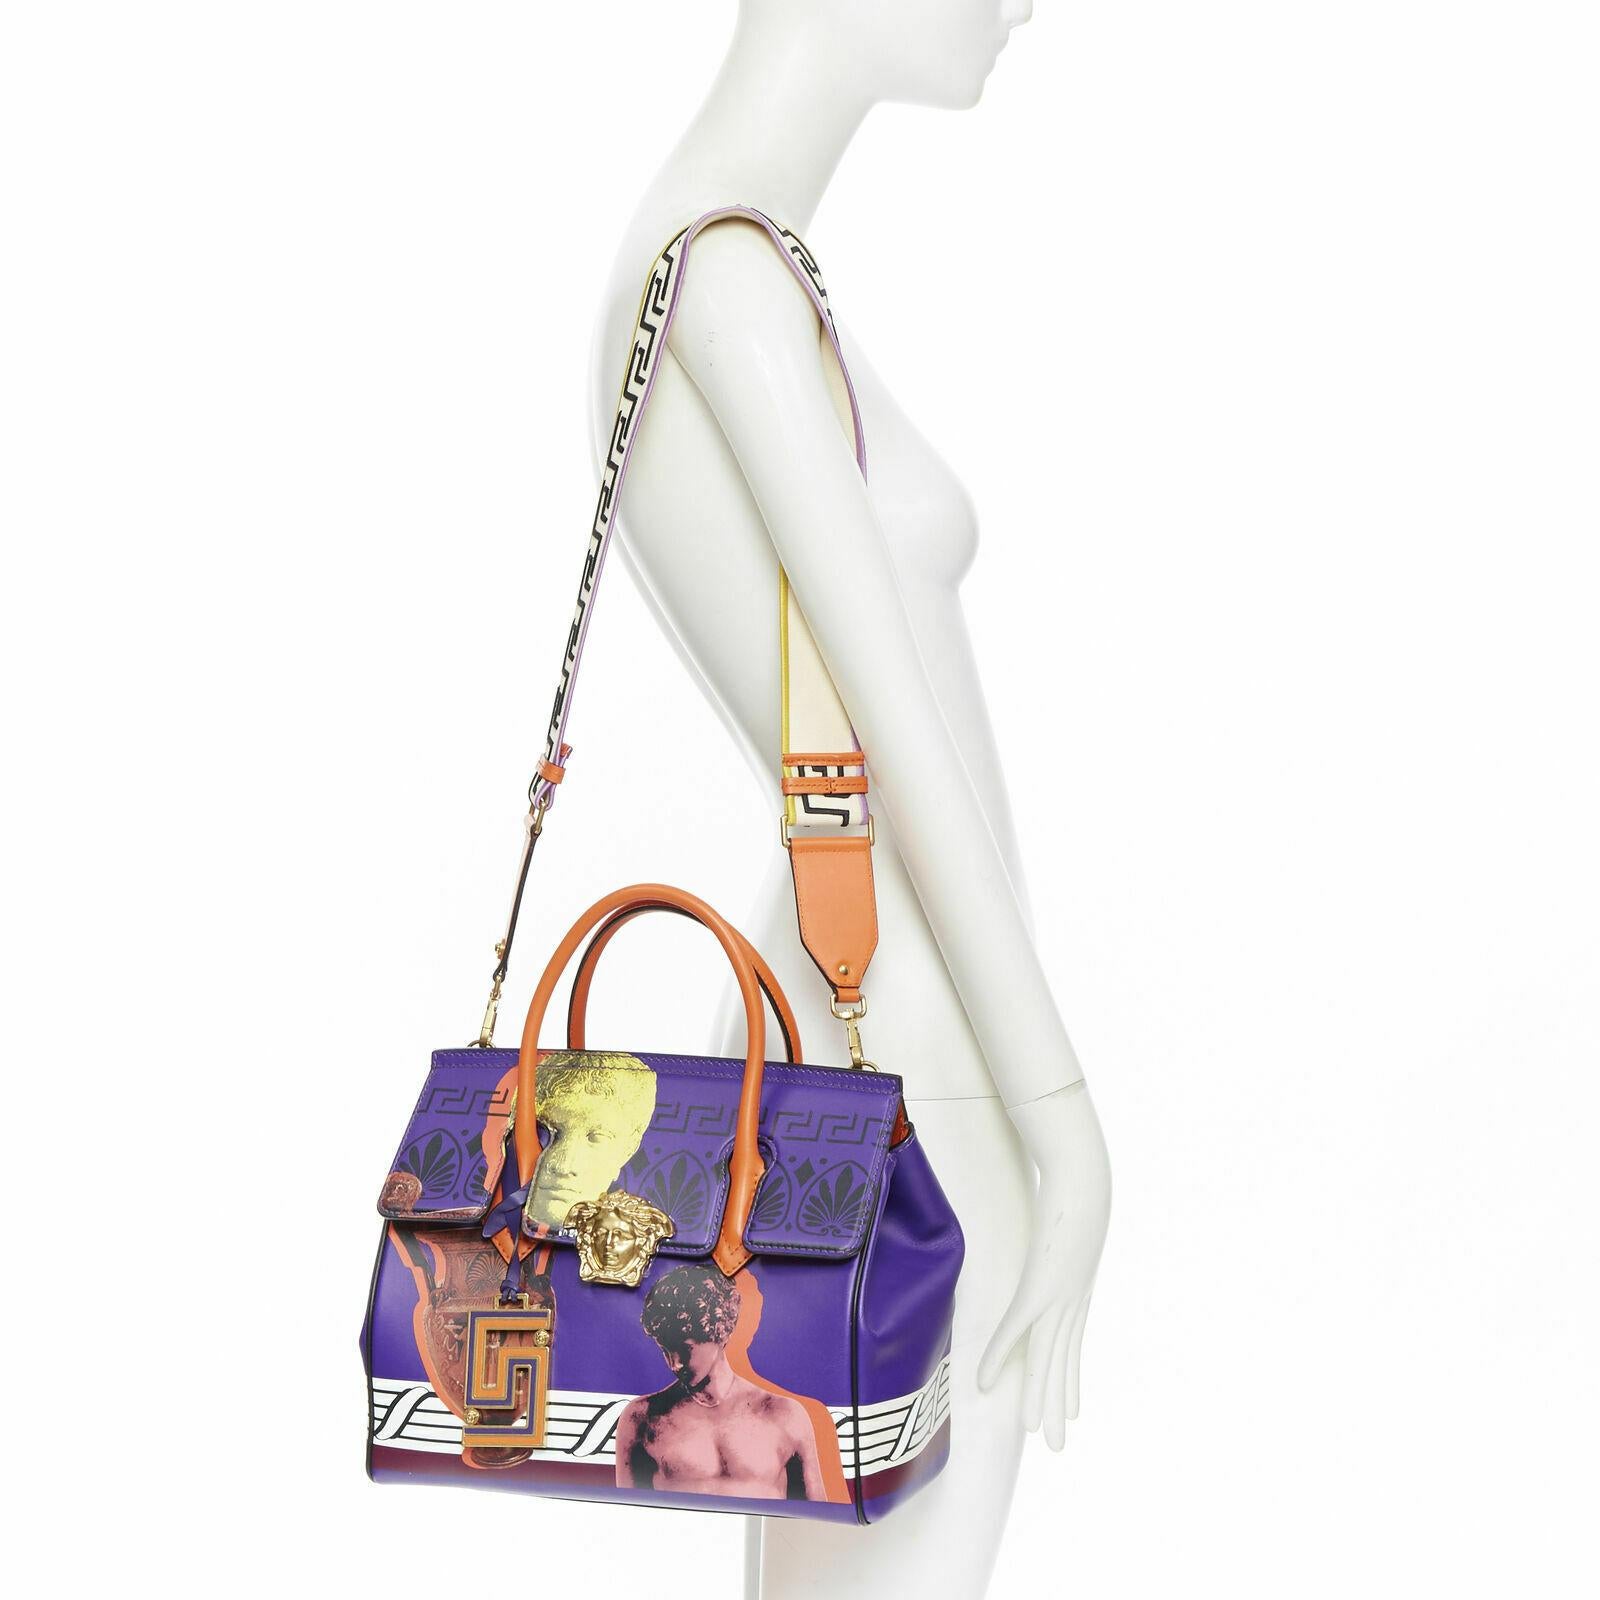 new VERSACE Palazzo Empire Medusa Medium Magna Grecia purple print limited bag 
Reference: TGAS/A04948 
Brand: Versace 
Designer: Donatella Versace 
Model: Palazzo Empire 
Collection: 2018 
Material: Leather 
Color: Purple 
Pattern: Abstract 
Extra